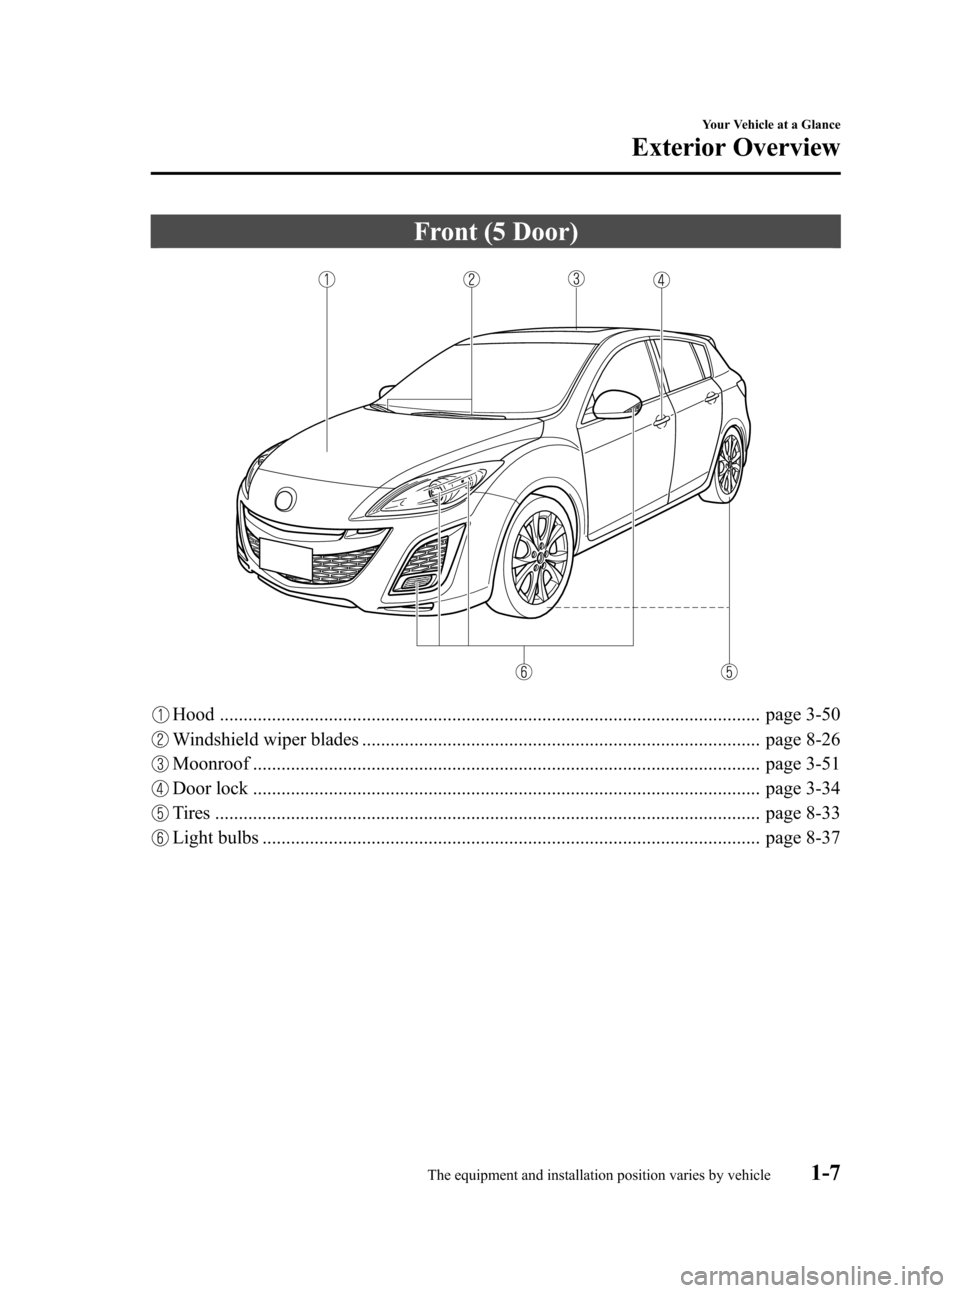 MAZDA MODEL 3 HATCHBACK 2010  Owners Manual (in English) Black plate (13,1)
Front (5 Door)
Hood .................................................................................................................. page 3-50
Windshield wiper blades ............